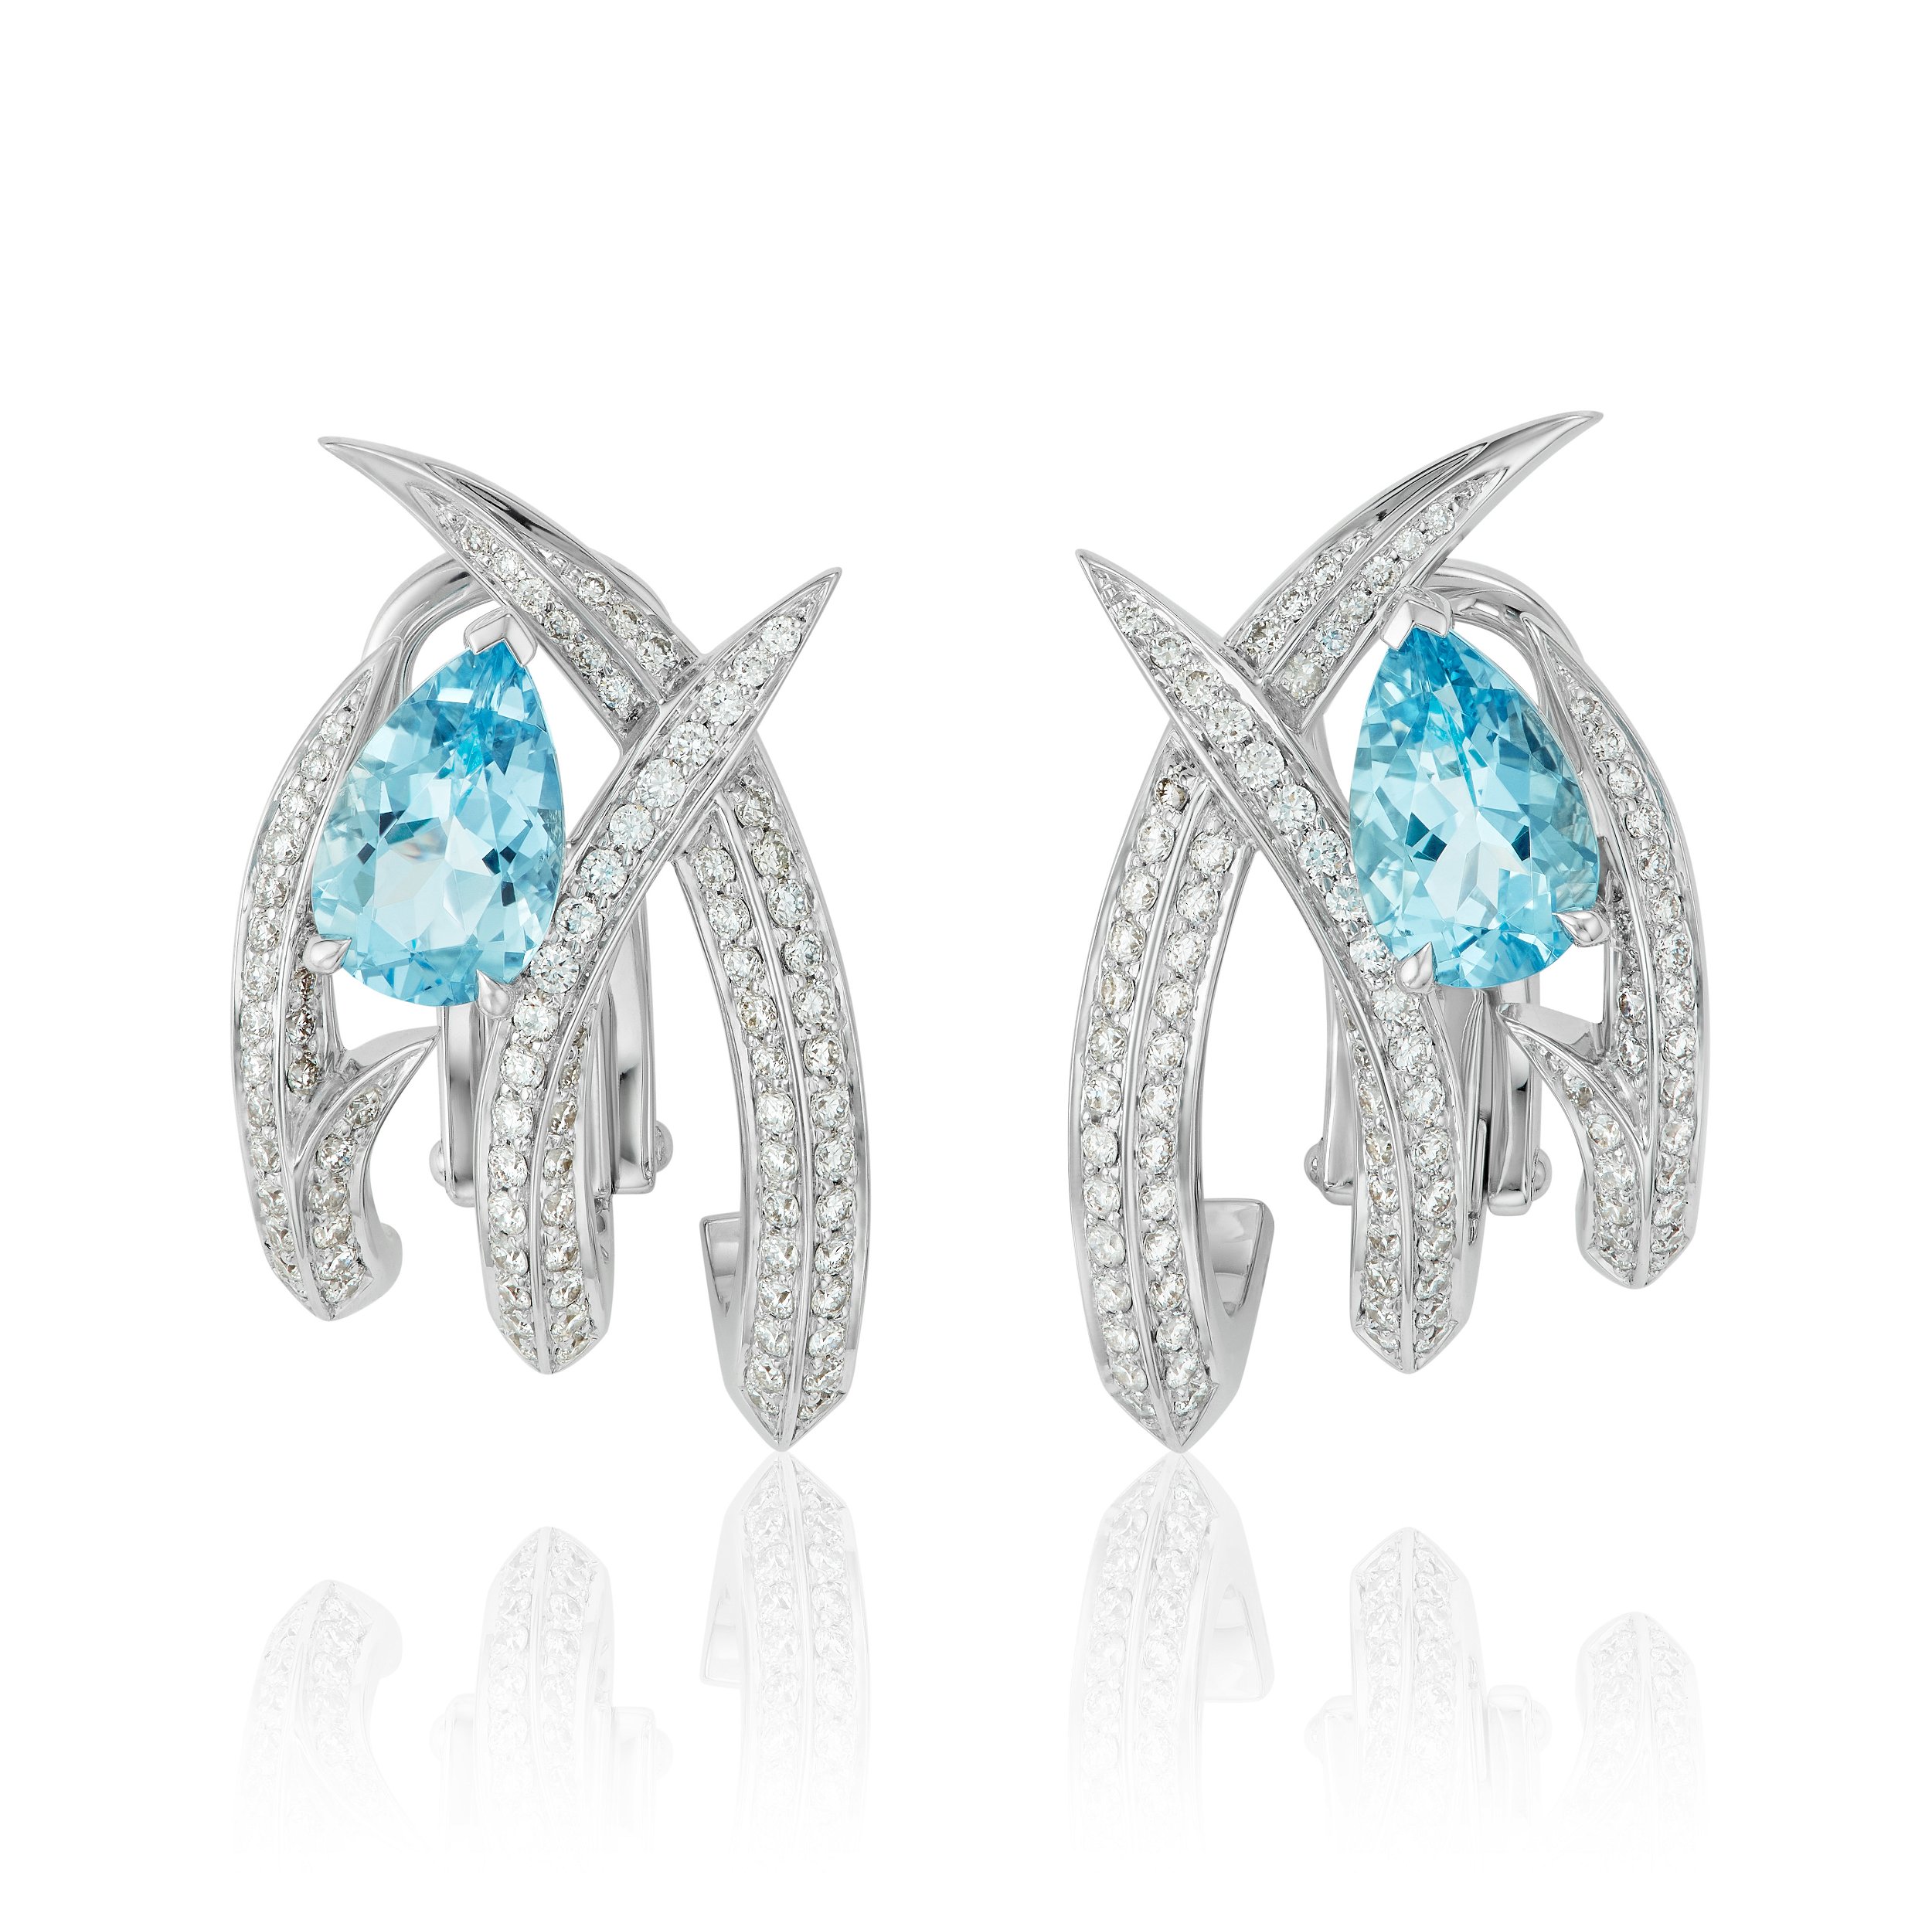 Thorn Embrace Caged Earrings with Aquamarine and White Diamonds in 18kt White Gold